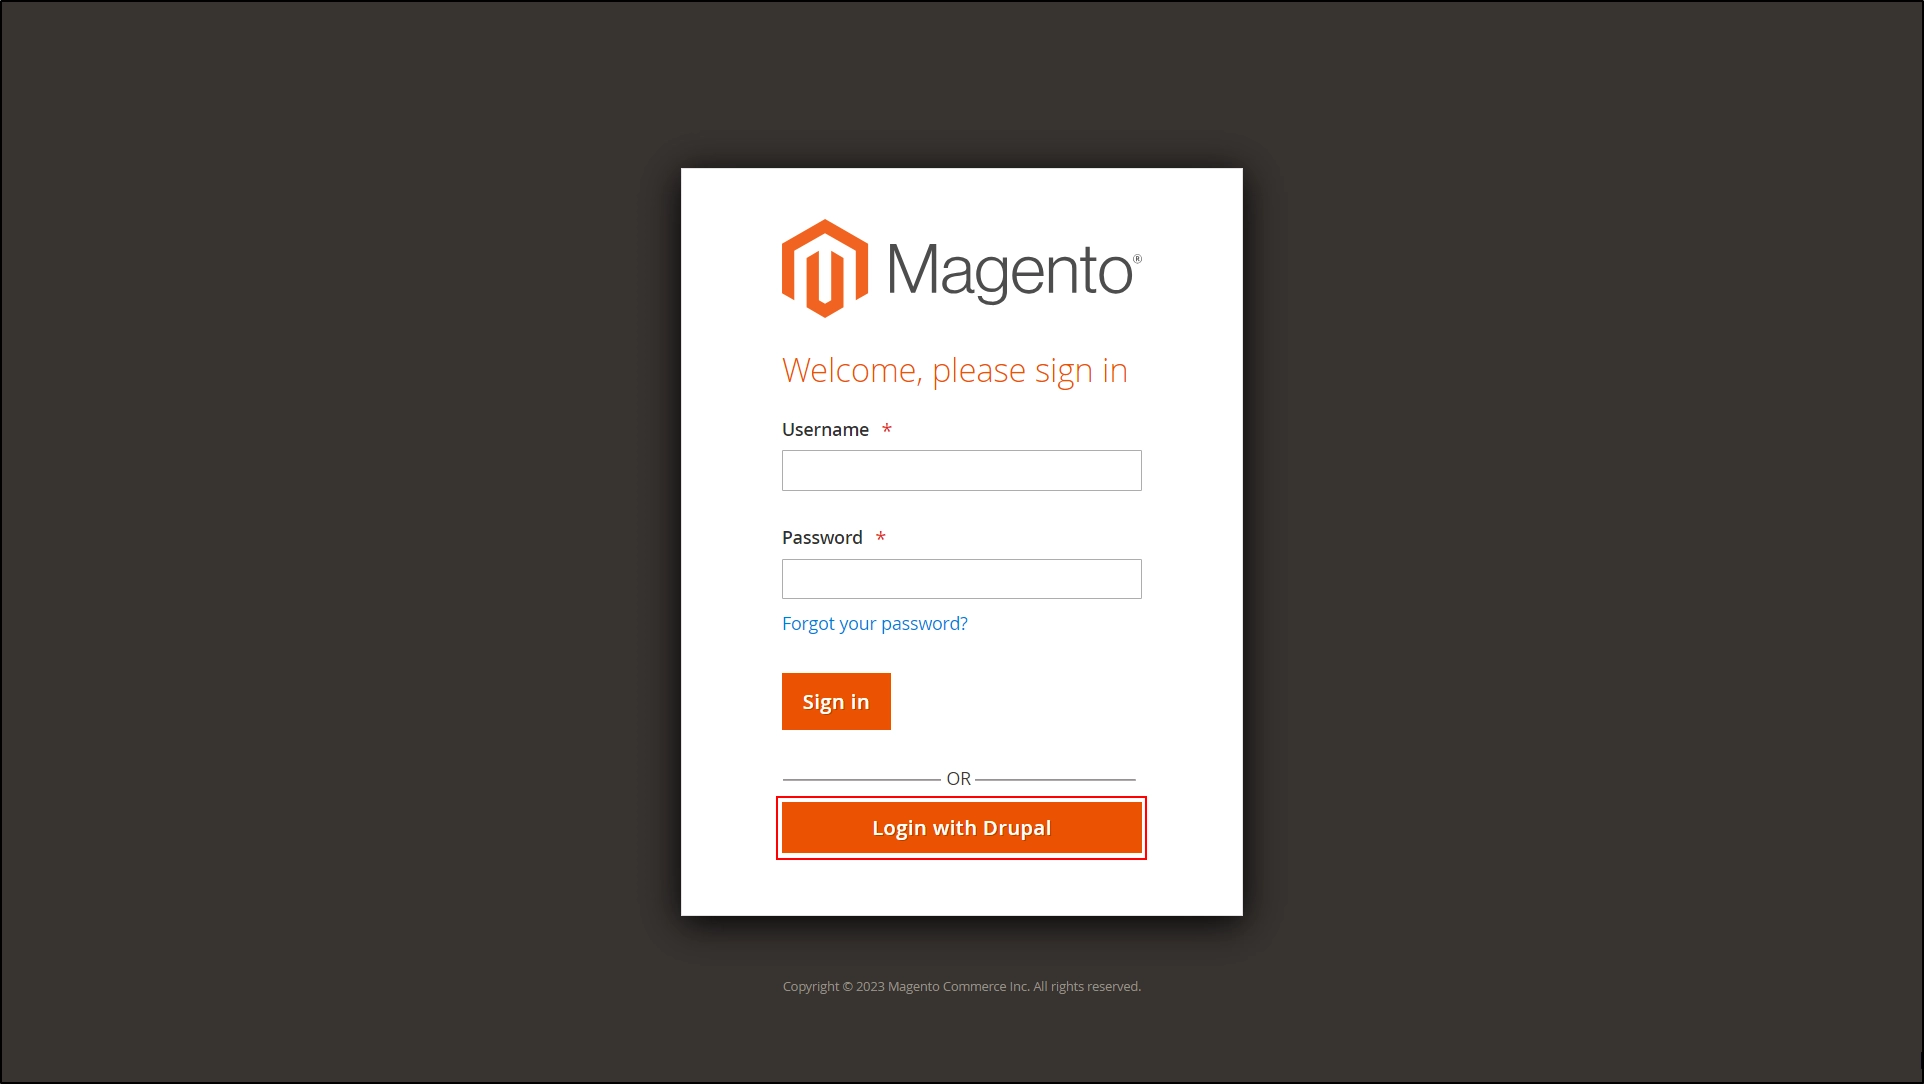 Open a new browser or private window to access the login page of Magento website